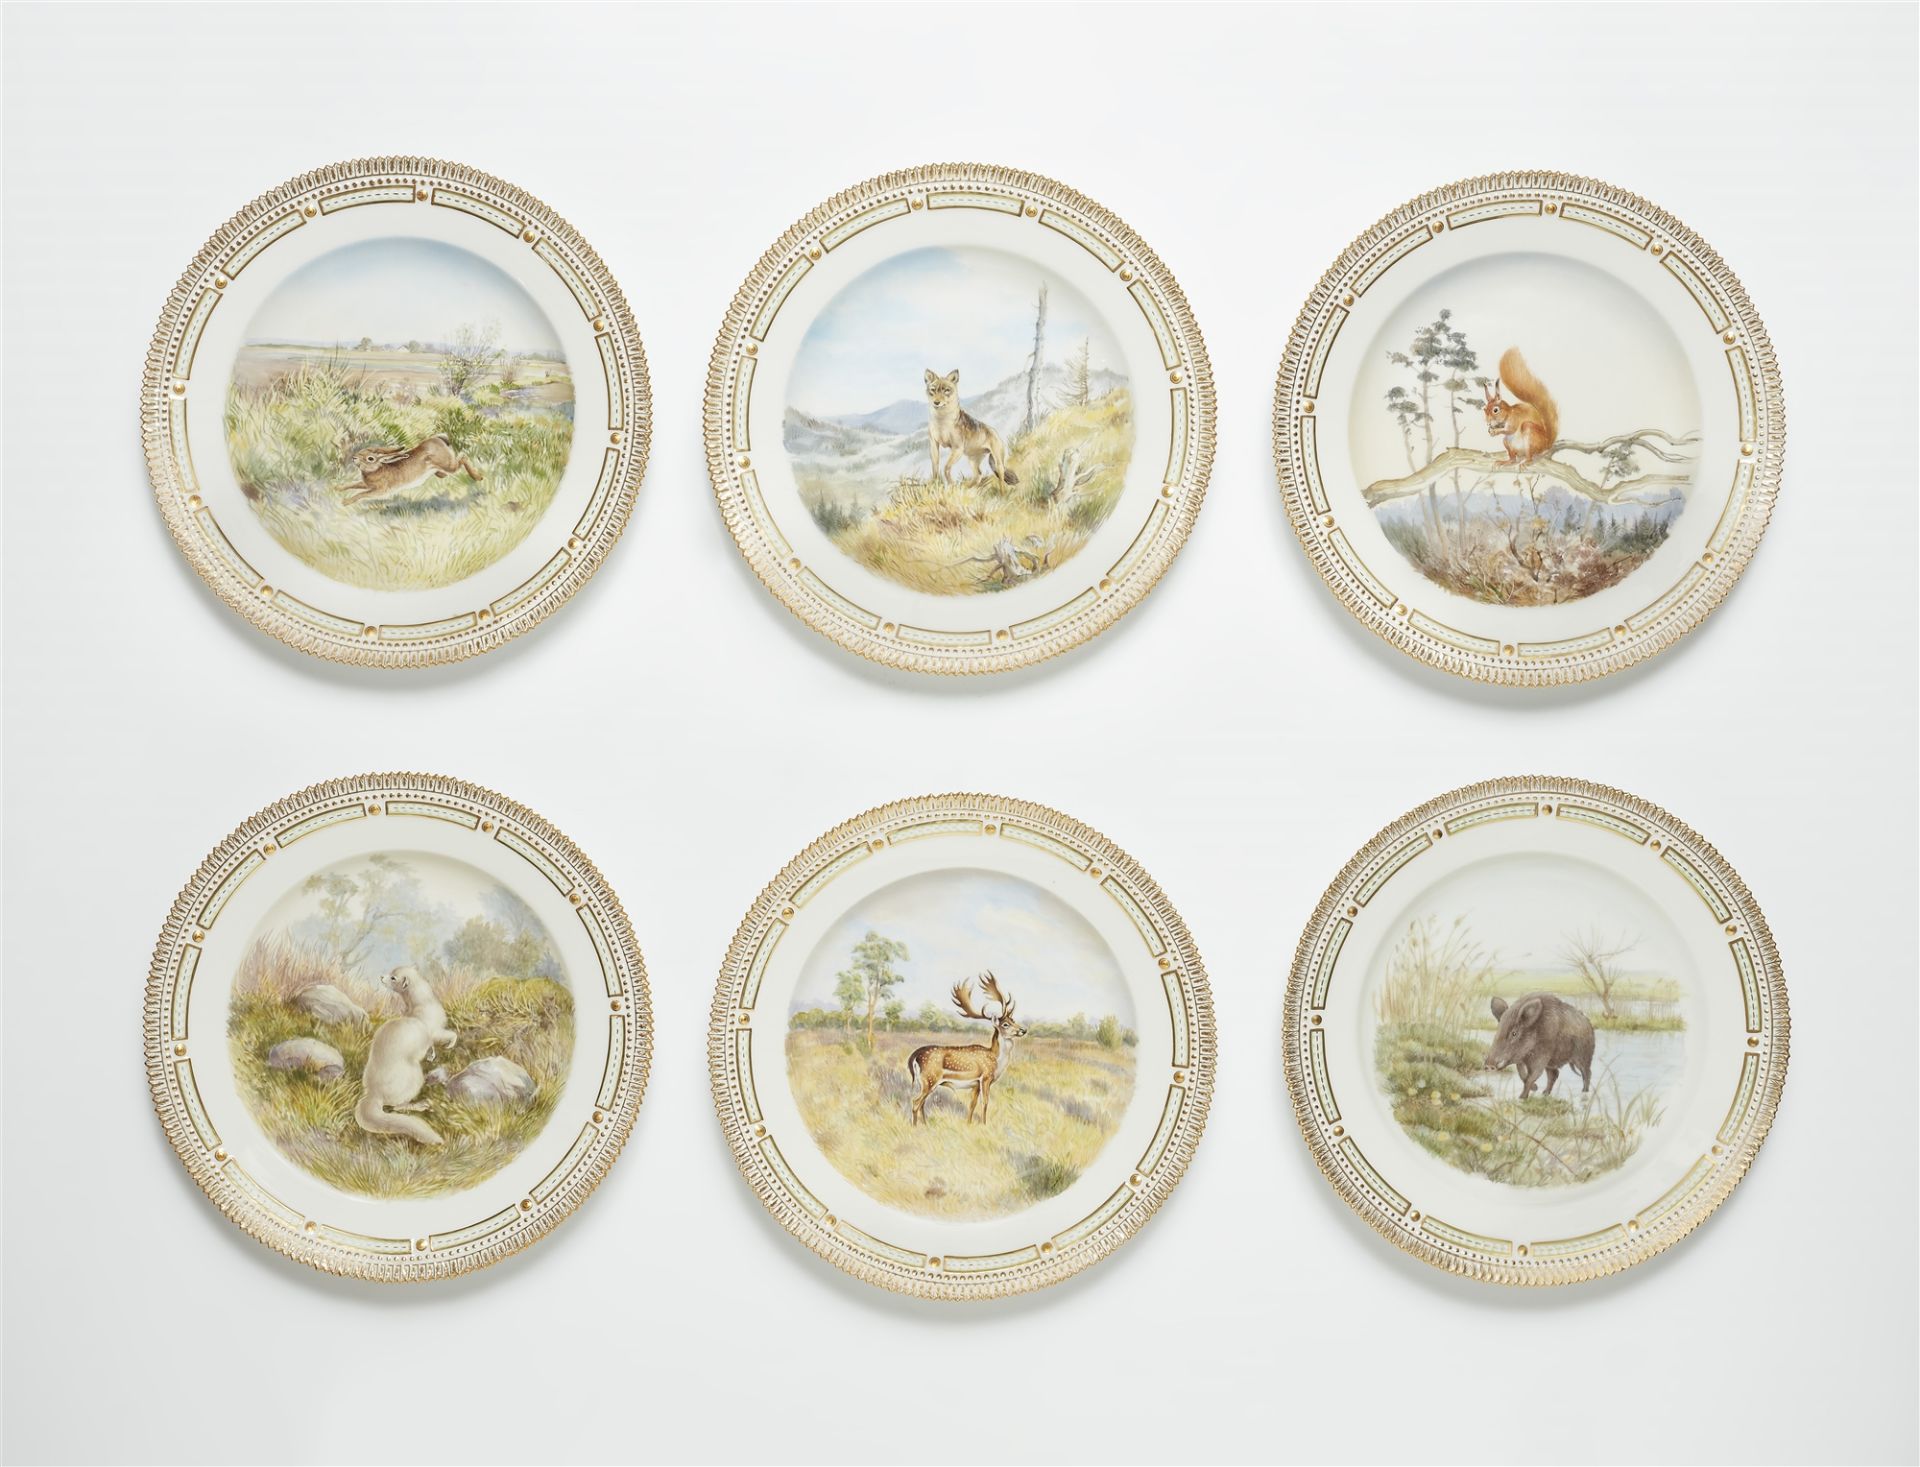 Six Royal Copenhagen porcelain dinner plates from a service with hunting motifs